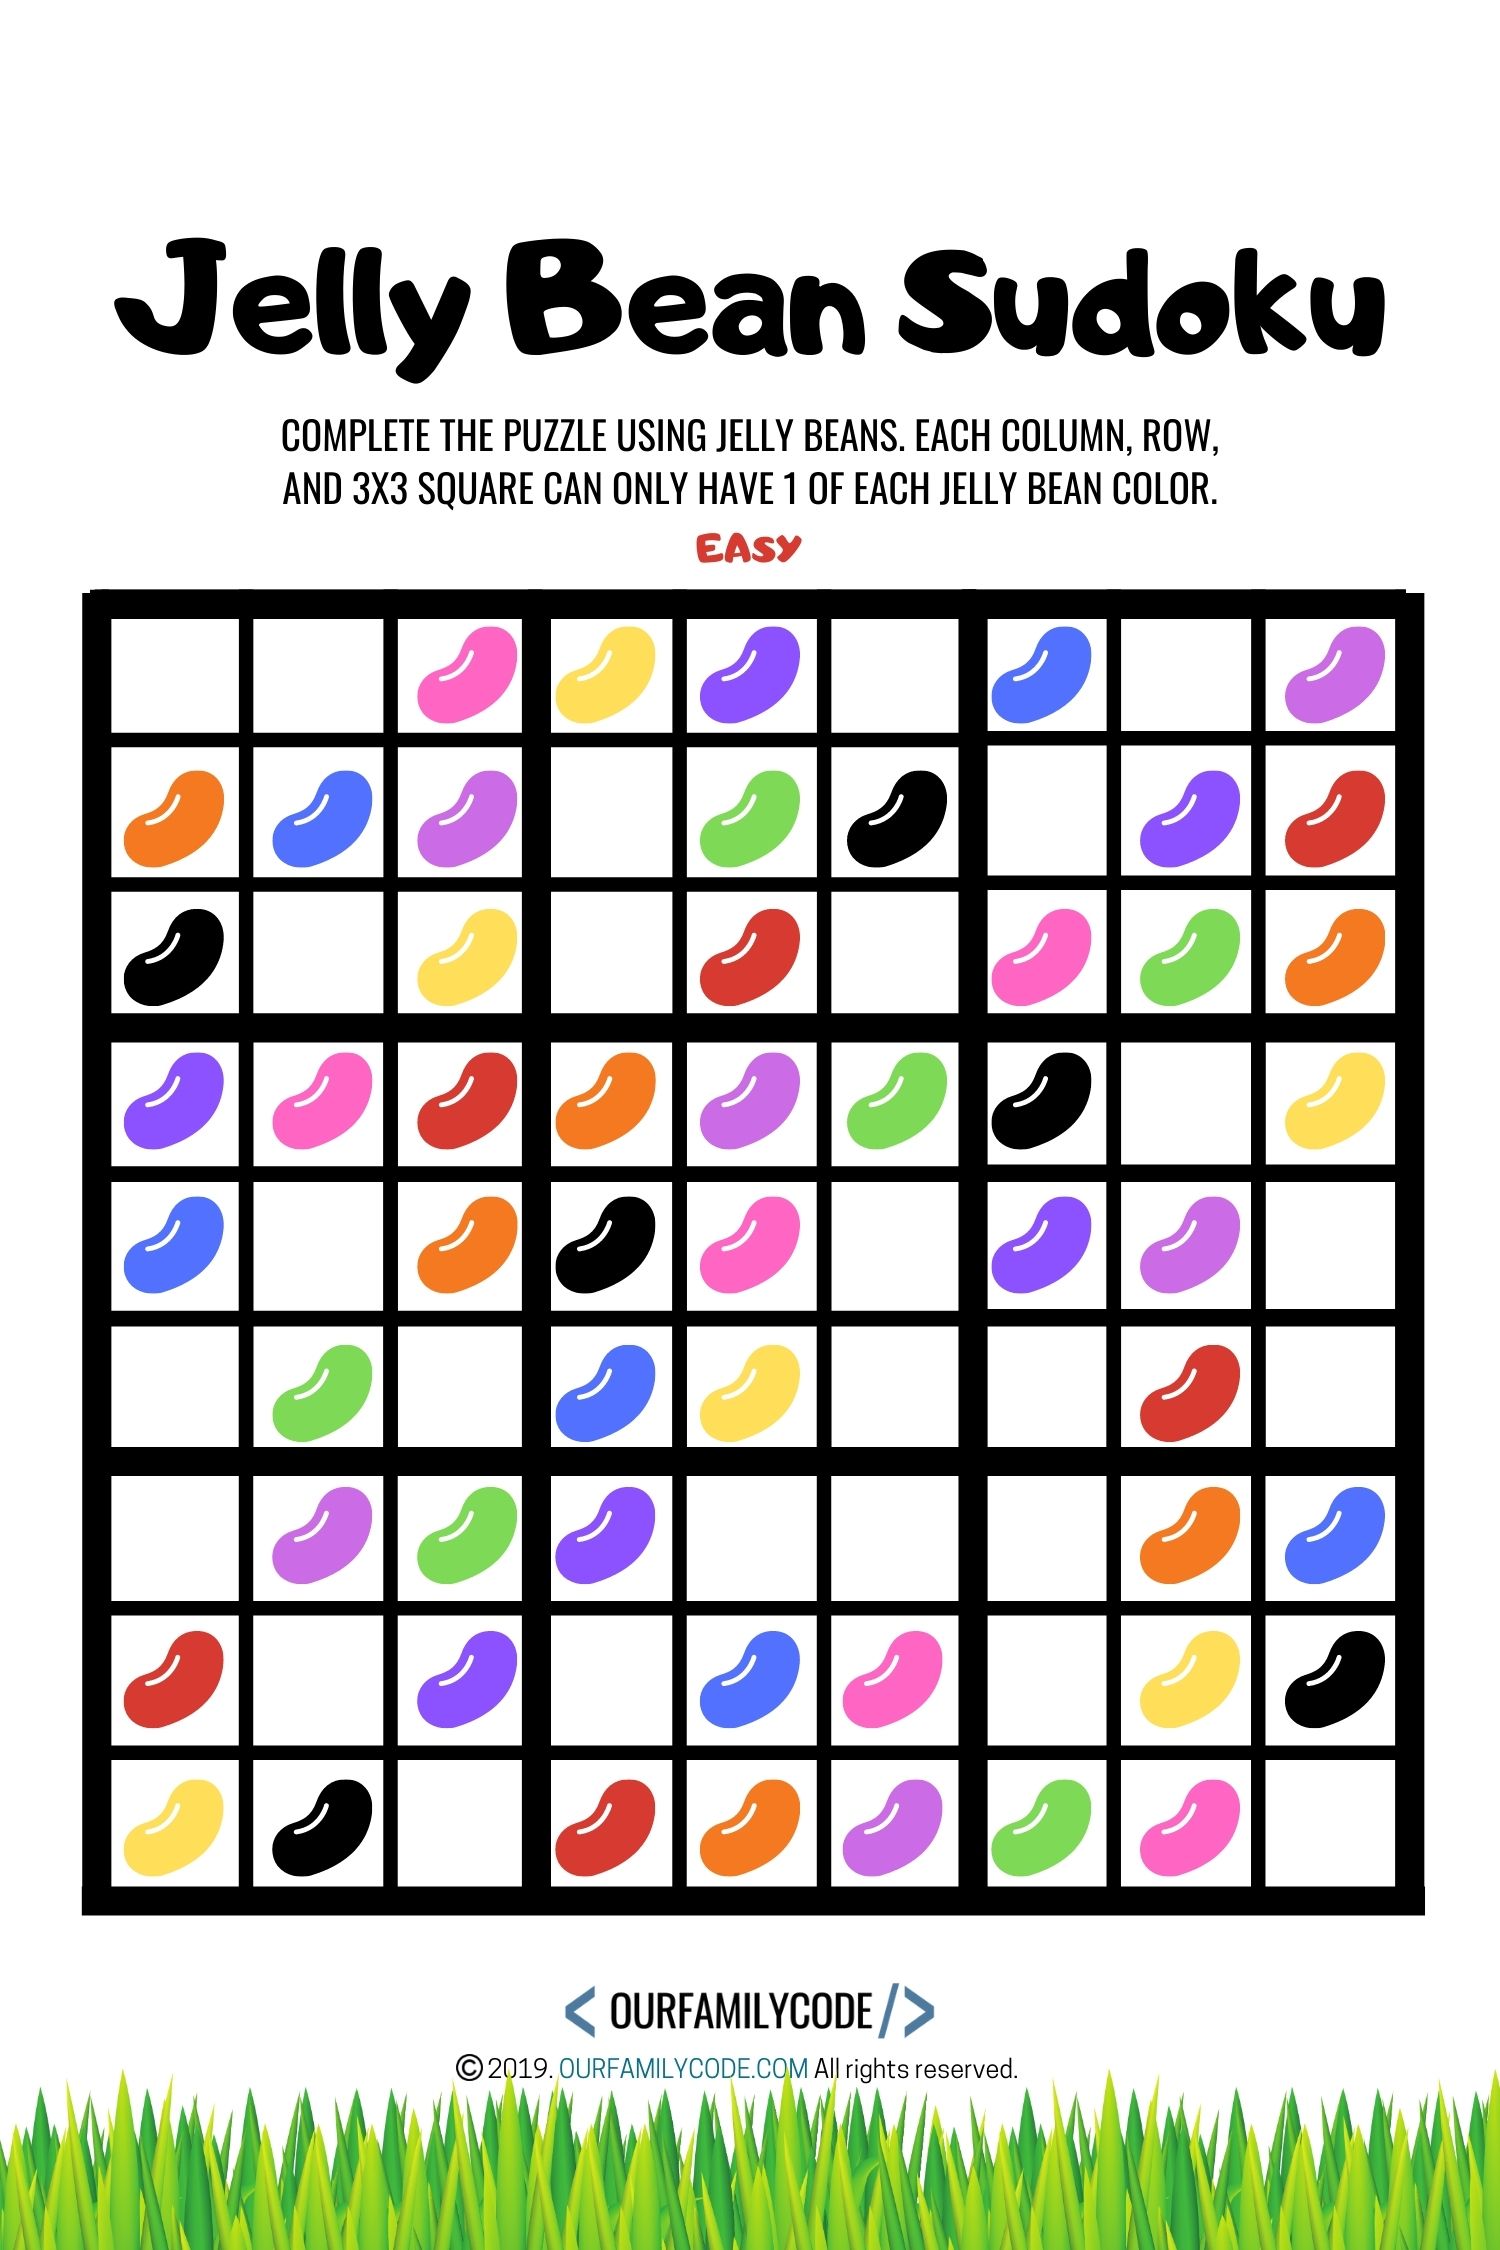 Work on logical reasoning and colors with this Easter Jelly Bean Sudoku unplugged coding activity for preschoolers to 5th graders! #STEAM #STEM #teachkidstocode #computationalthinking #algorithms #logicalreasoning #homeschool #sudokuforkids